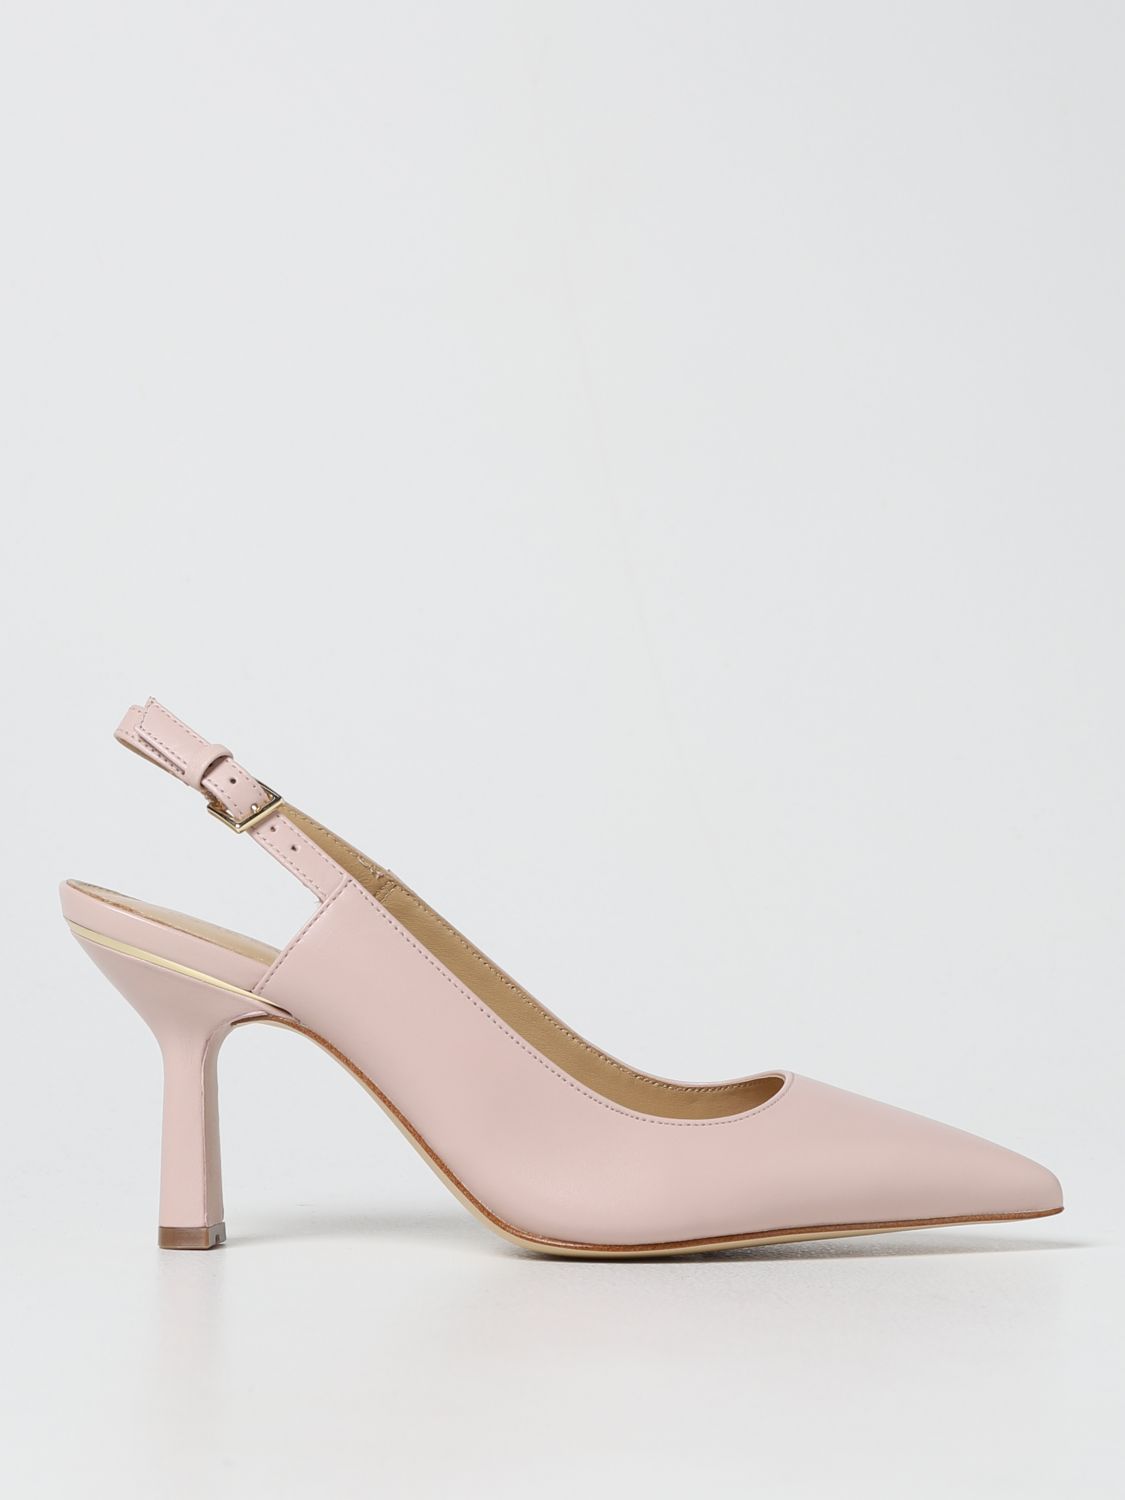 MICHAEL KORS: Cleo Michael slingbacks in smooth leather - Pink | Michael  Kors pumps 40T1CLMG1L online on 